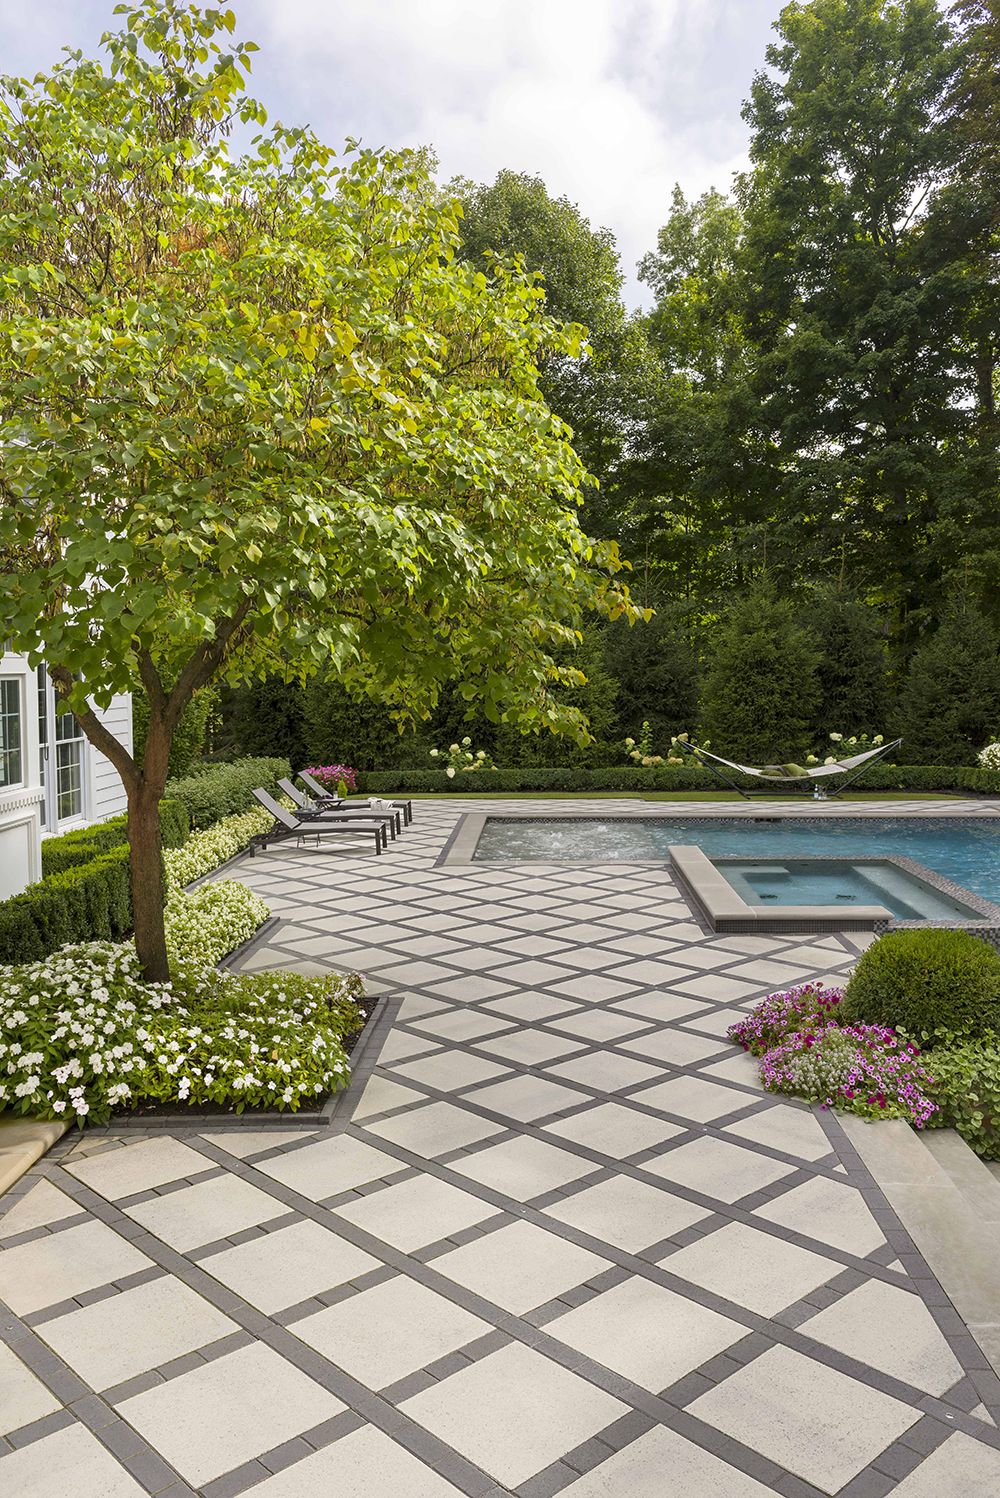 The Beauty and Durability of Concrete Patios